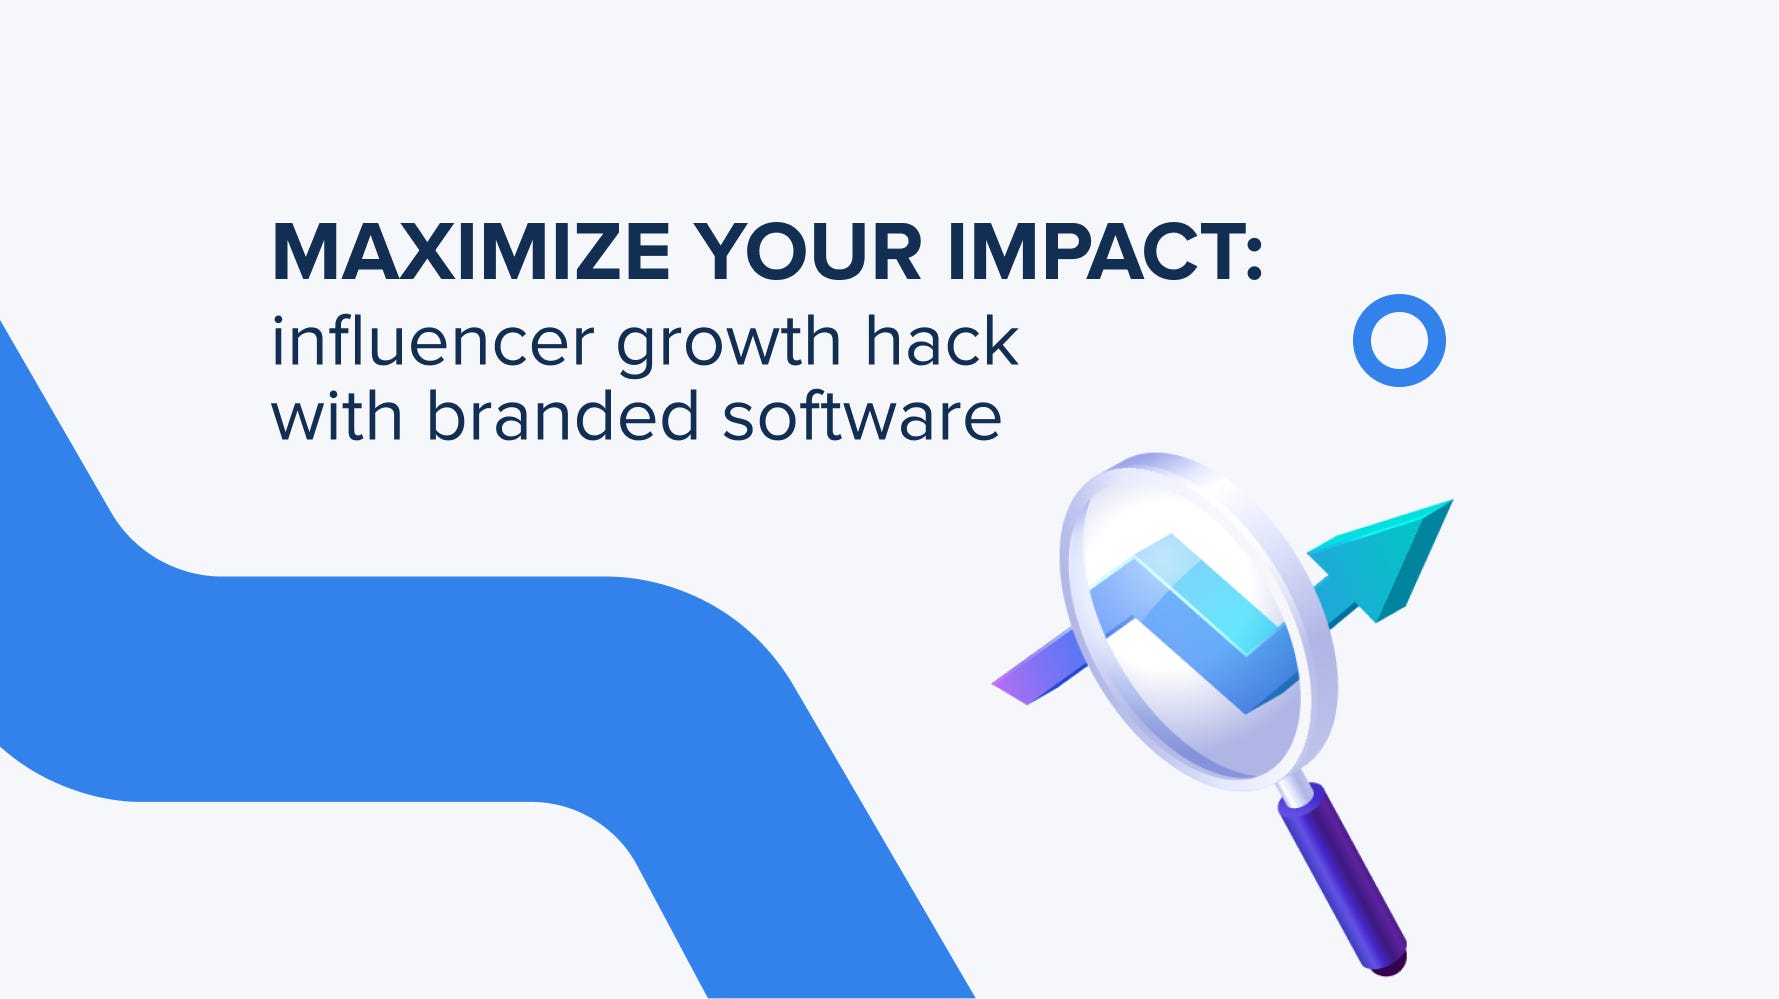 Maximize your impact: Influencer growth hack with branded software